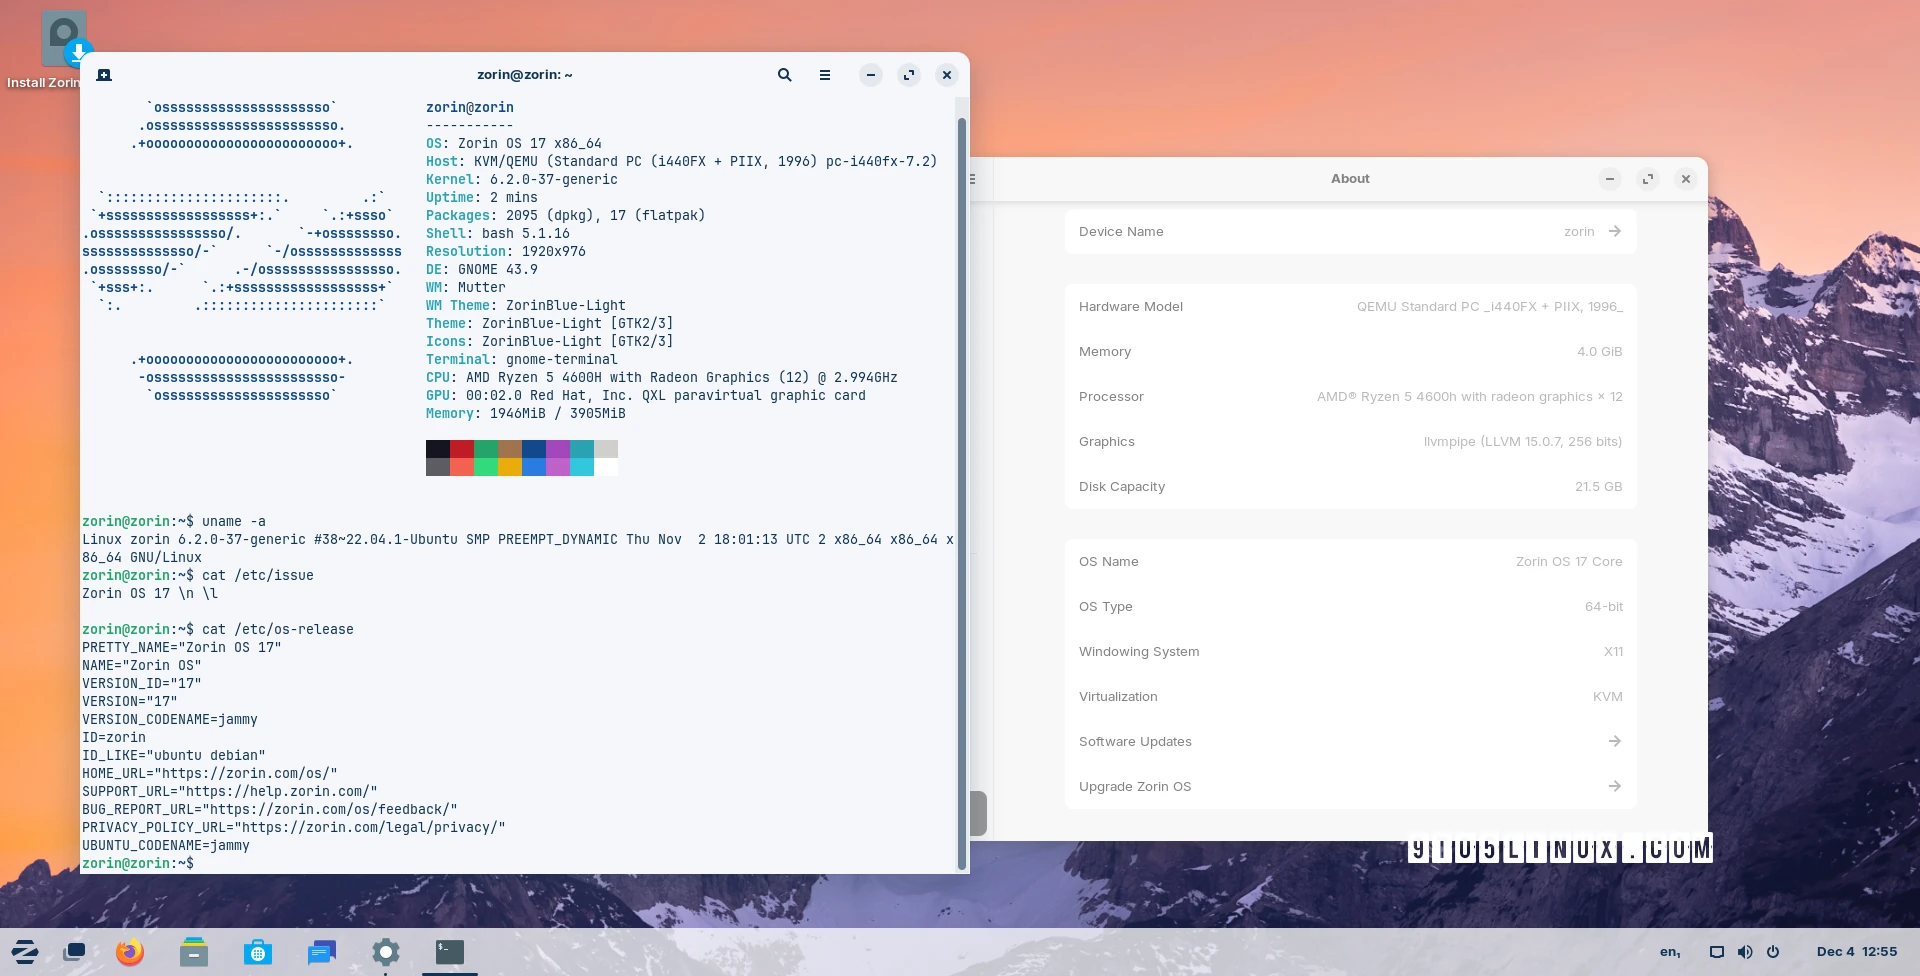 Zorin OS 17 Beta Released with Quick Settings, Spatial Desktop, and More